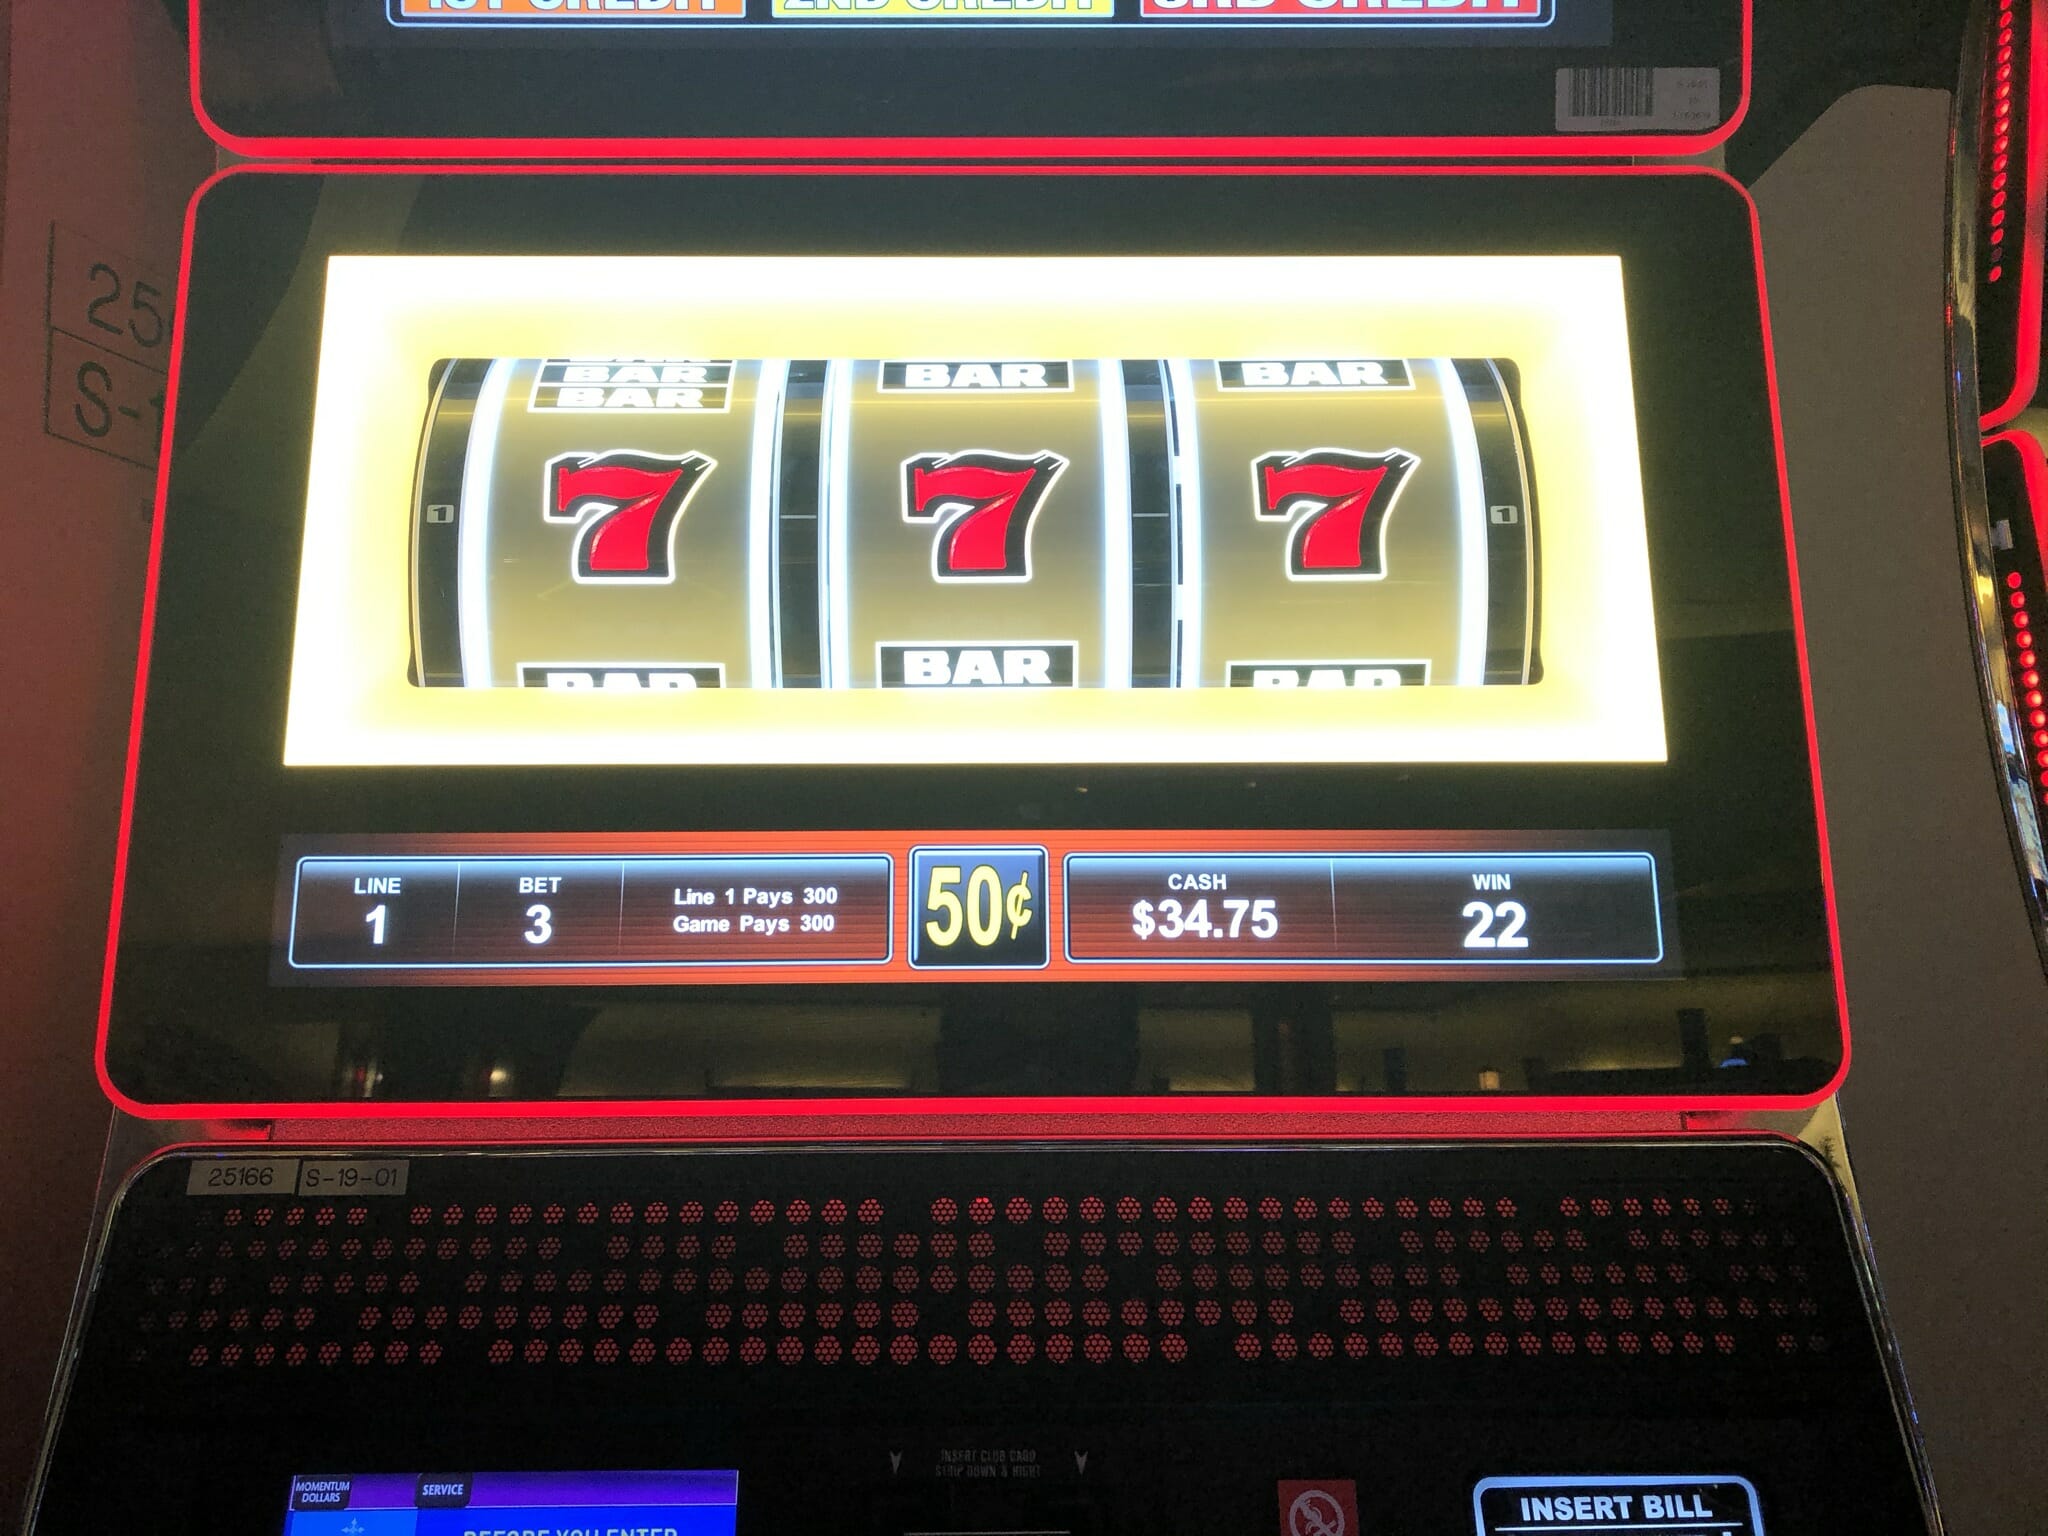 does stopping reel on slot machine help